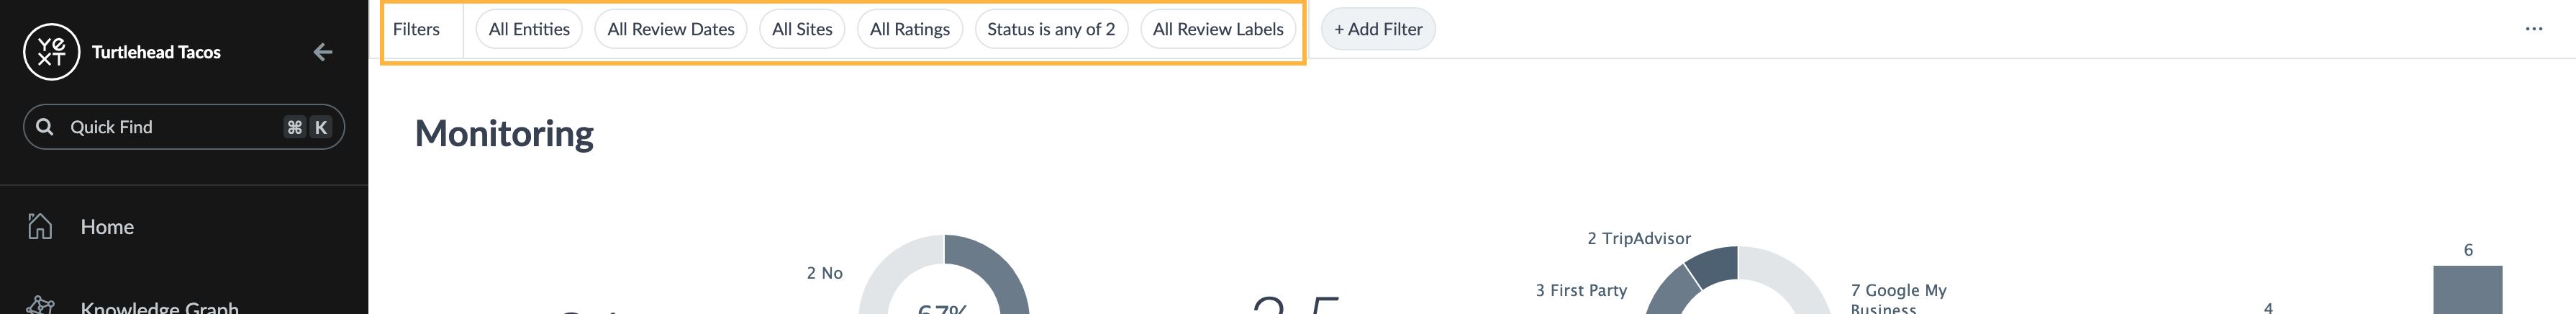 Basic filtering options at the top of the page